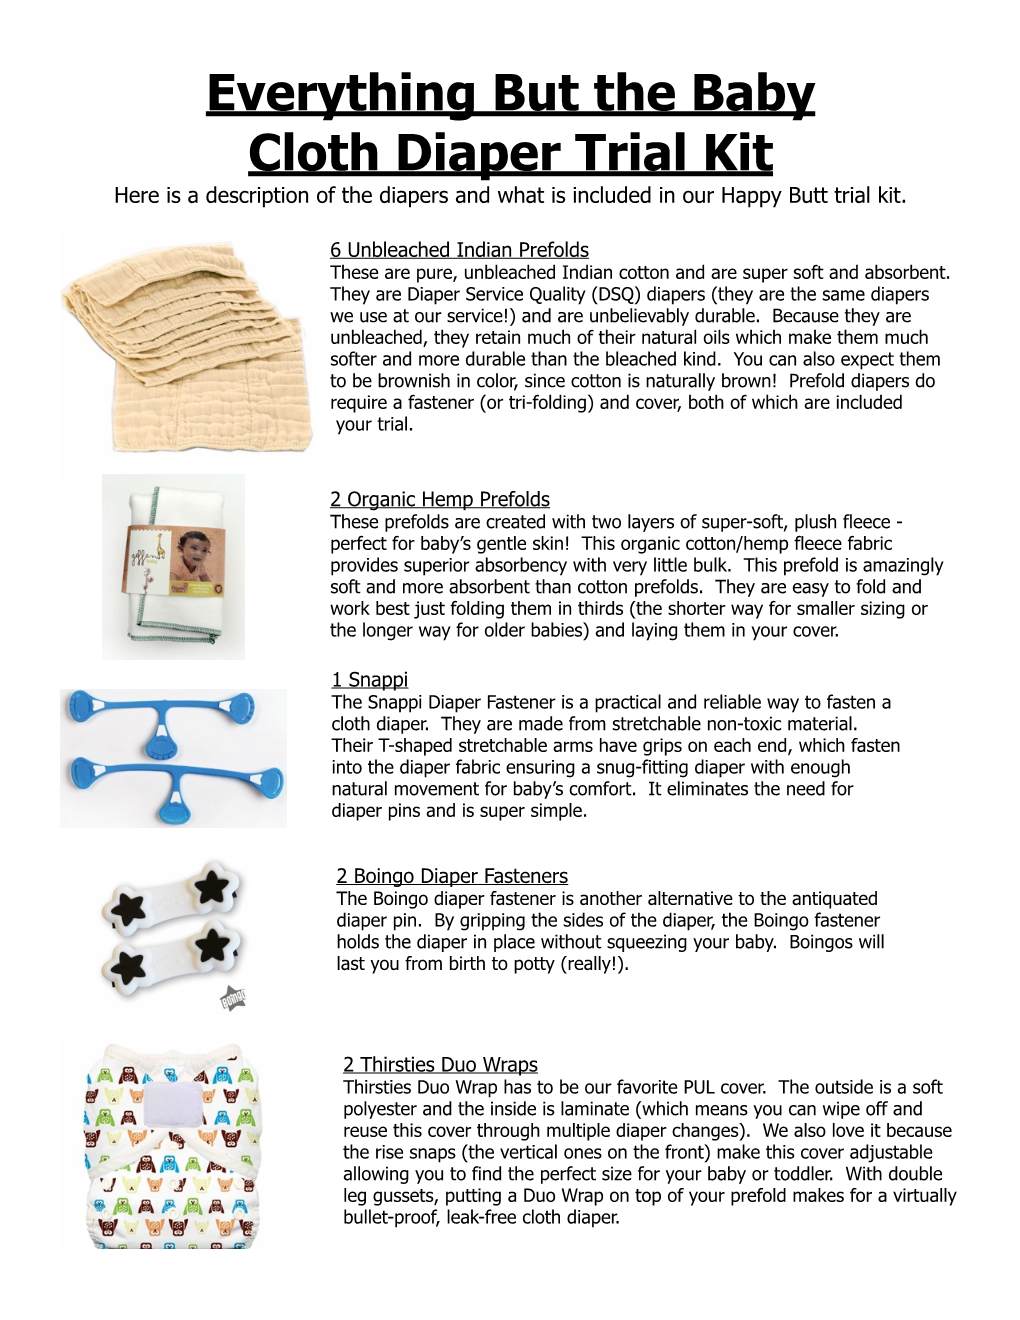 Everything but the Baby Cloth Diaper Trial Kit Here Is a Description of the Diapers and What Is Included in Our Happy Butt Trial Kit